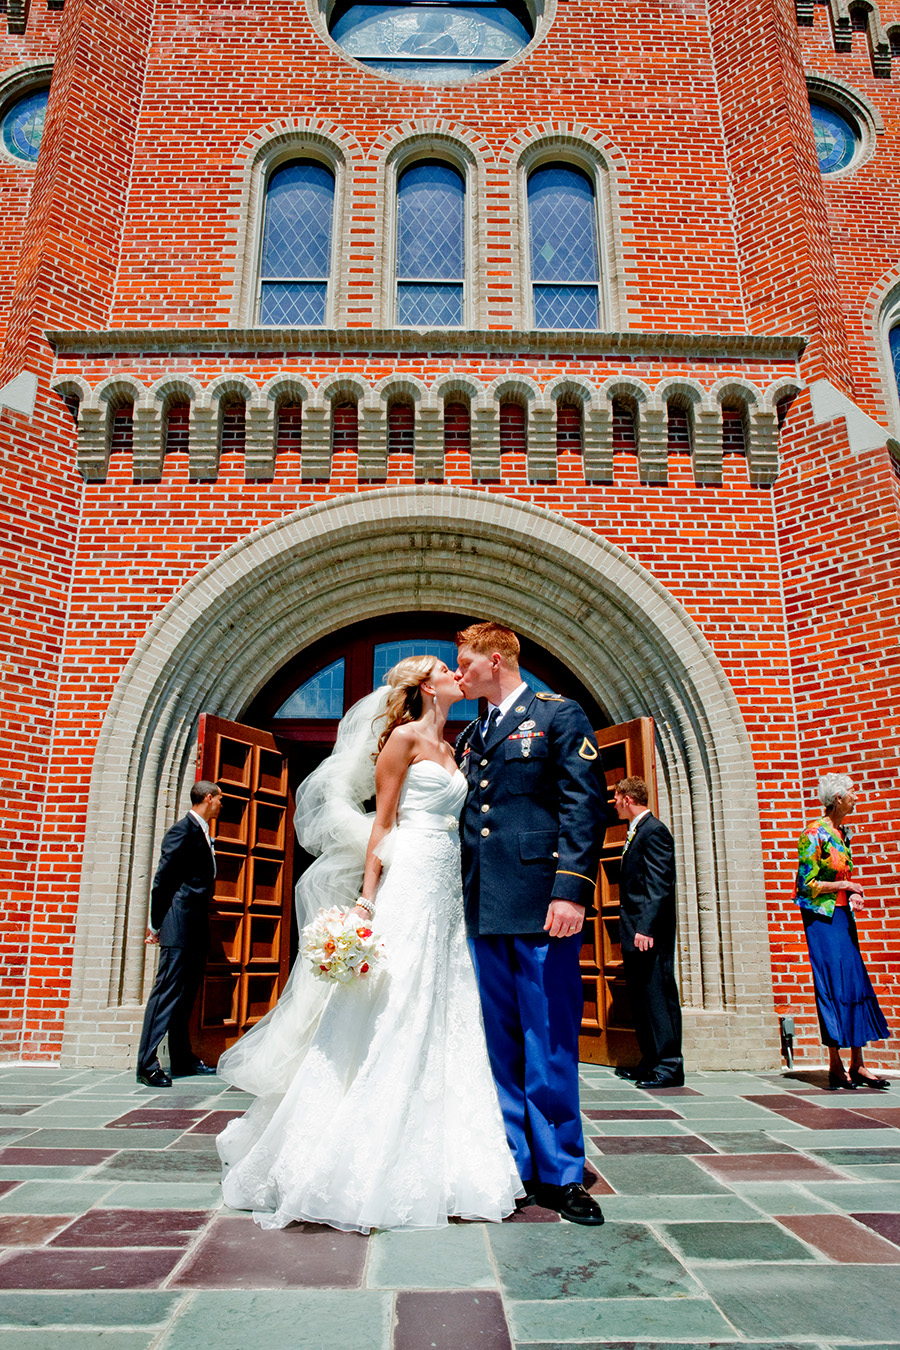 Bride and Groom kissing outside of church